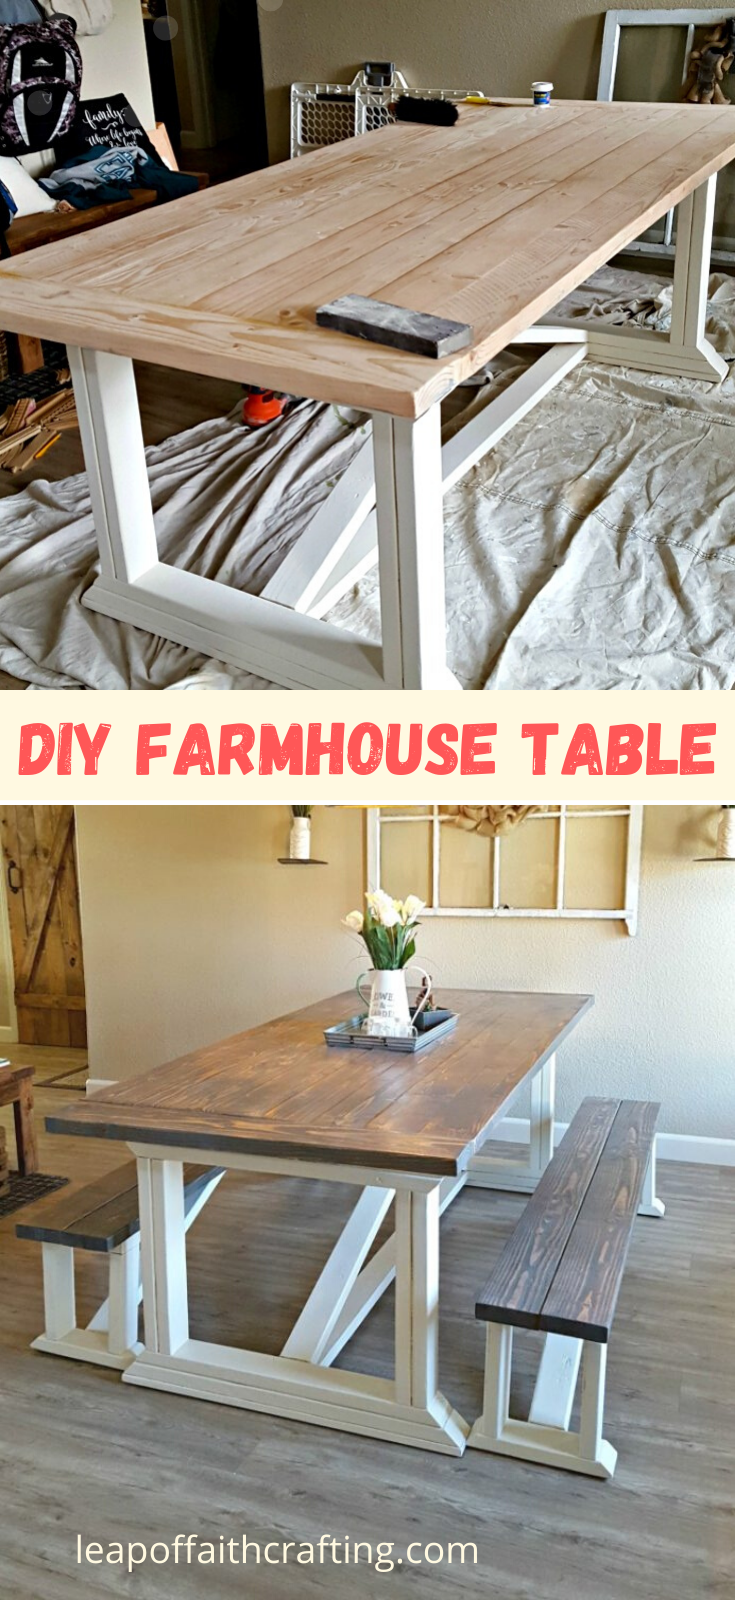 How to Make a Farmhouse Table - How to Make a Farmhouse Table -   19 diy Table farmhouse ideas